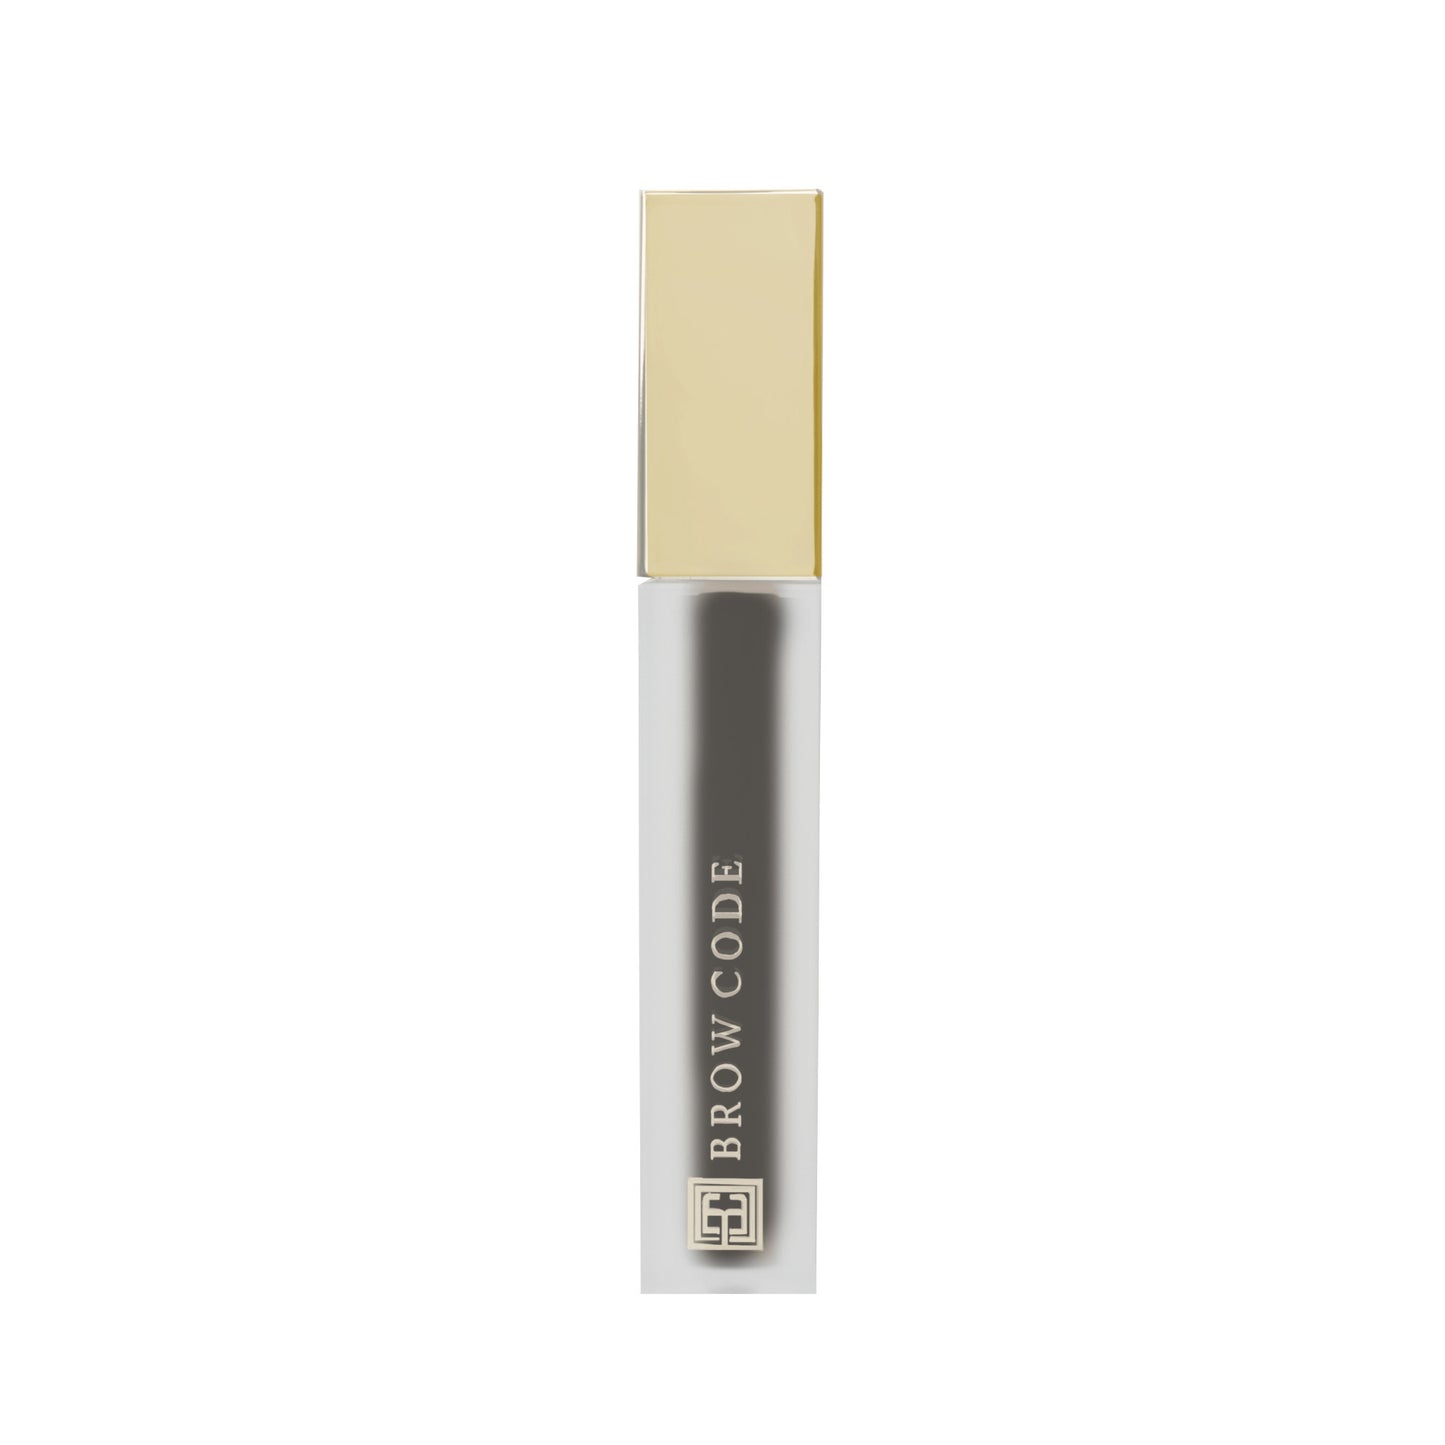 Tinted Multi-Peptide Brow Gel - Color-Granite - product against a white background